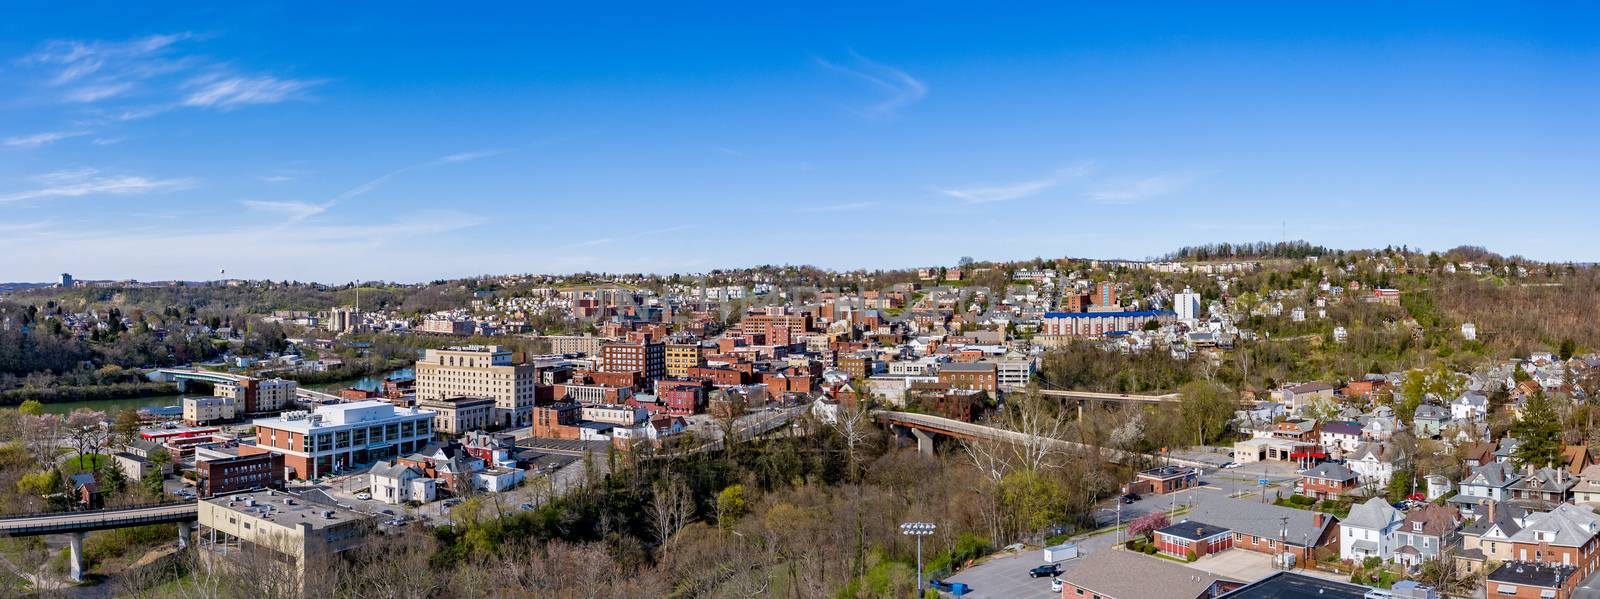 Aerial drone panorama the downtown area of Morgantown, West Virginia by steheap